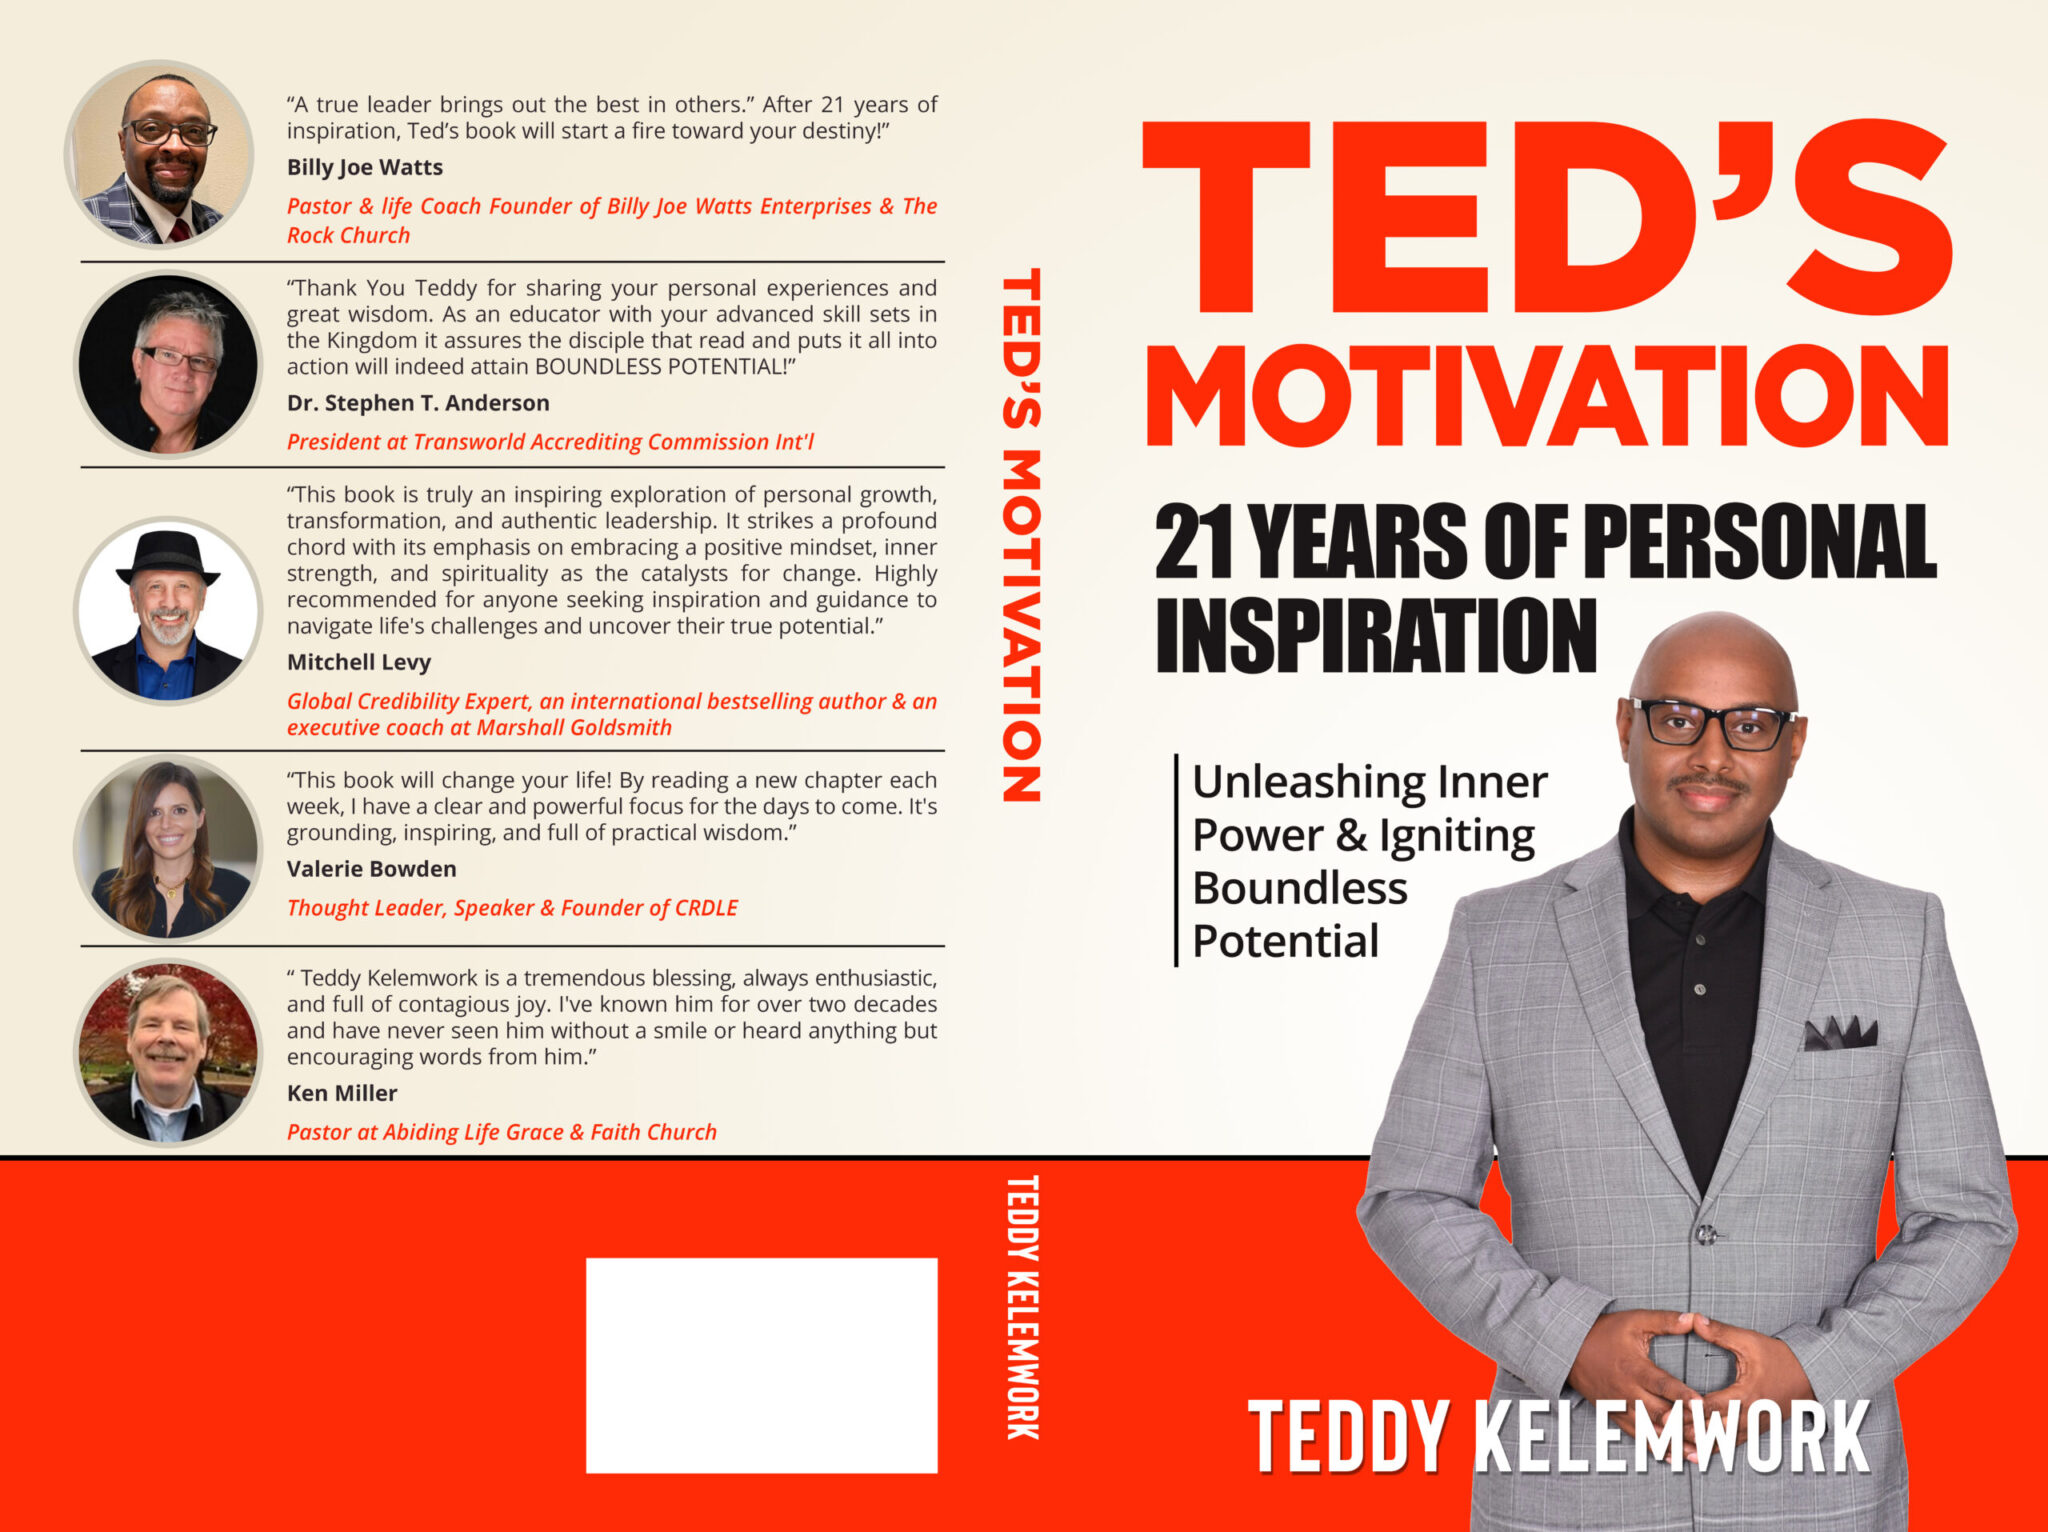 Teddy Kelemwork's Motivational Book "Ted's Motivation: 21 Years of Personal Inspiration" is Out Now on Amazon